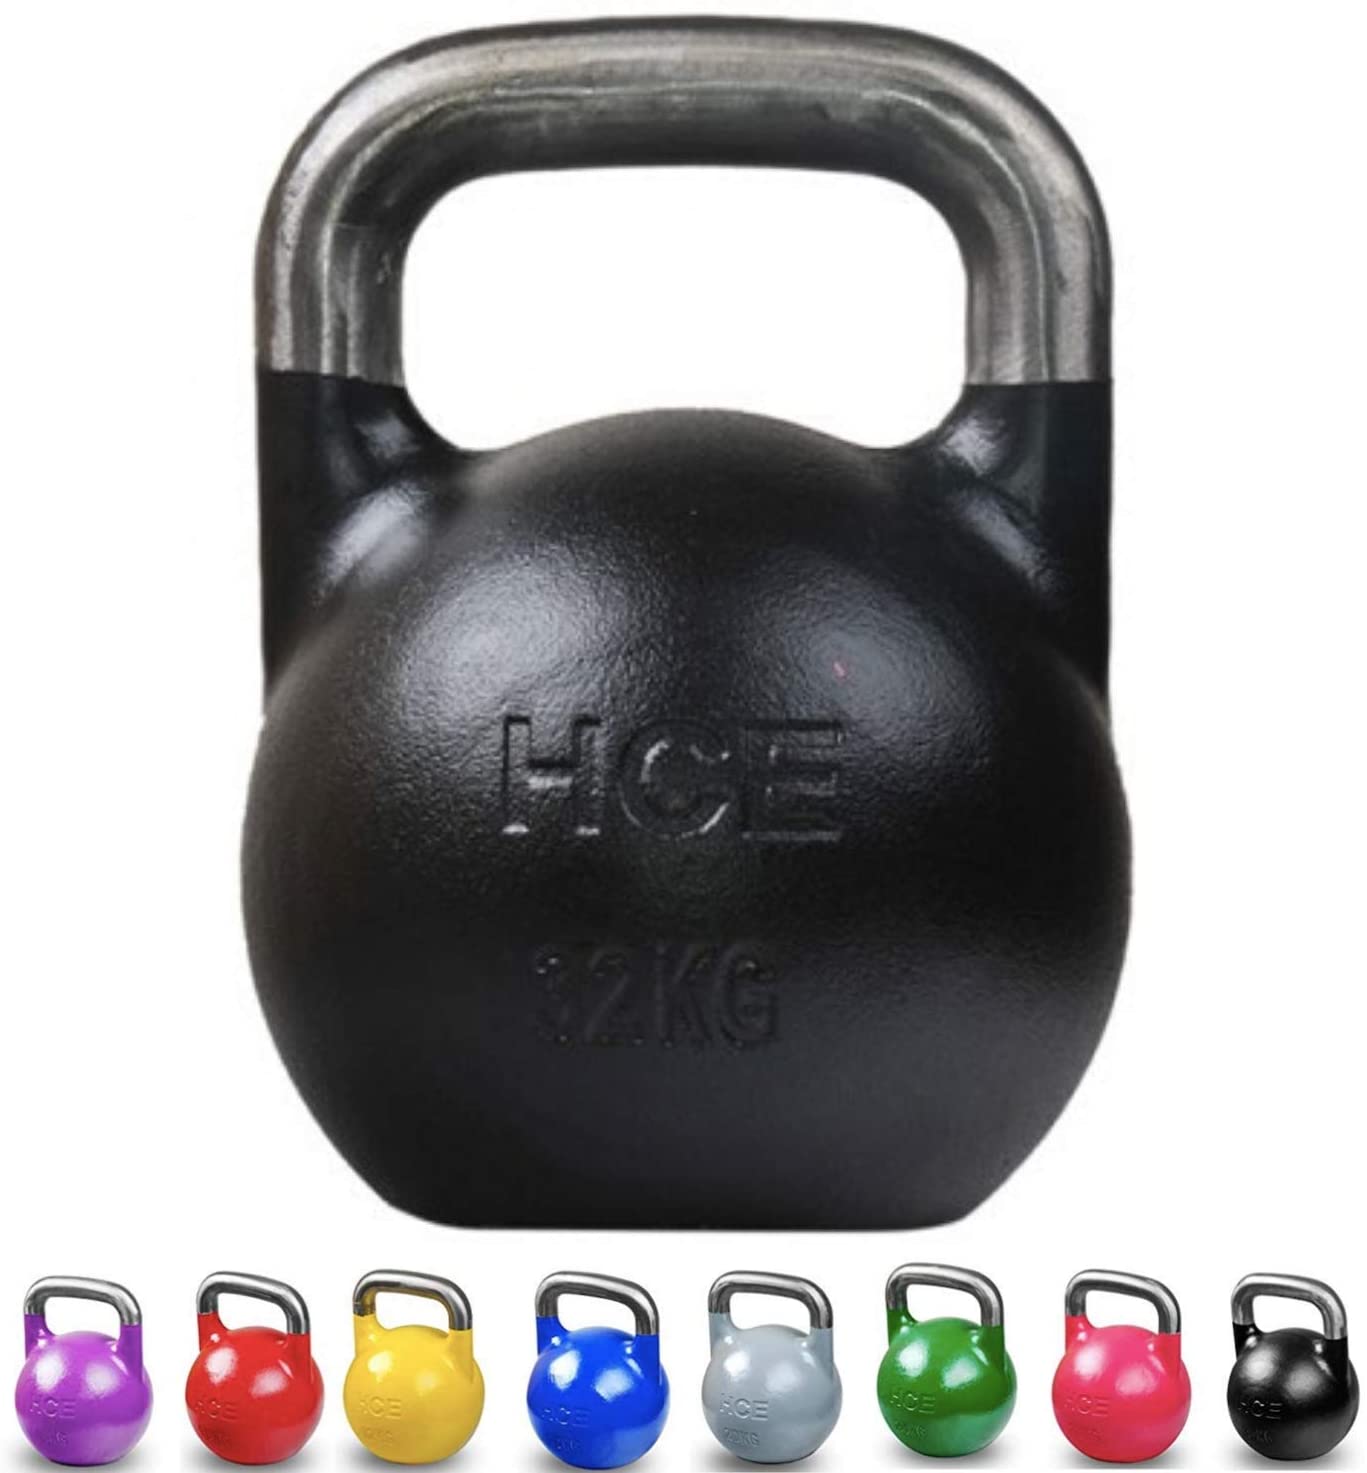 HCE Competition Kettlebells